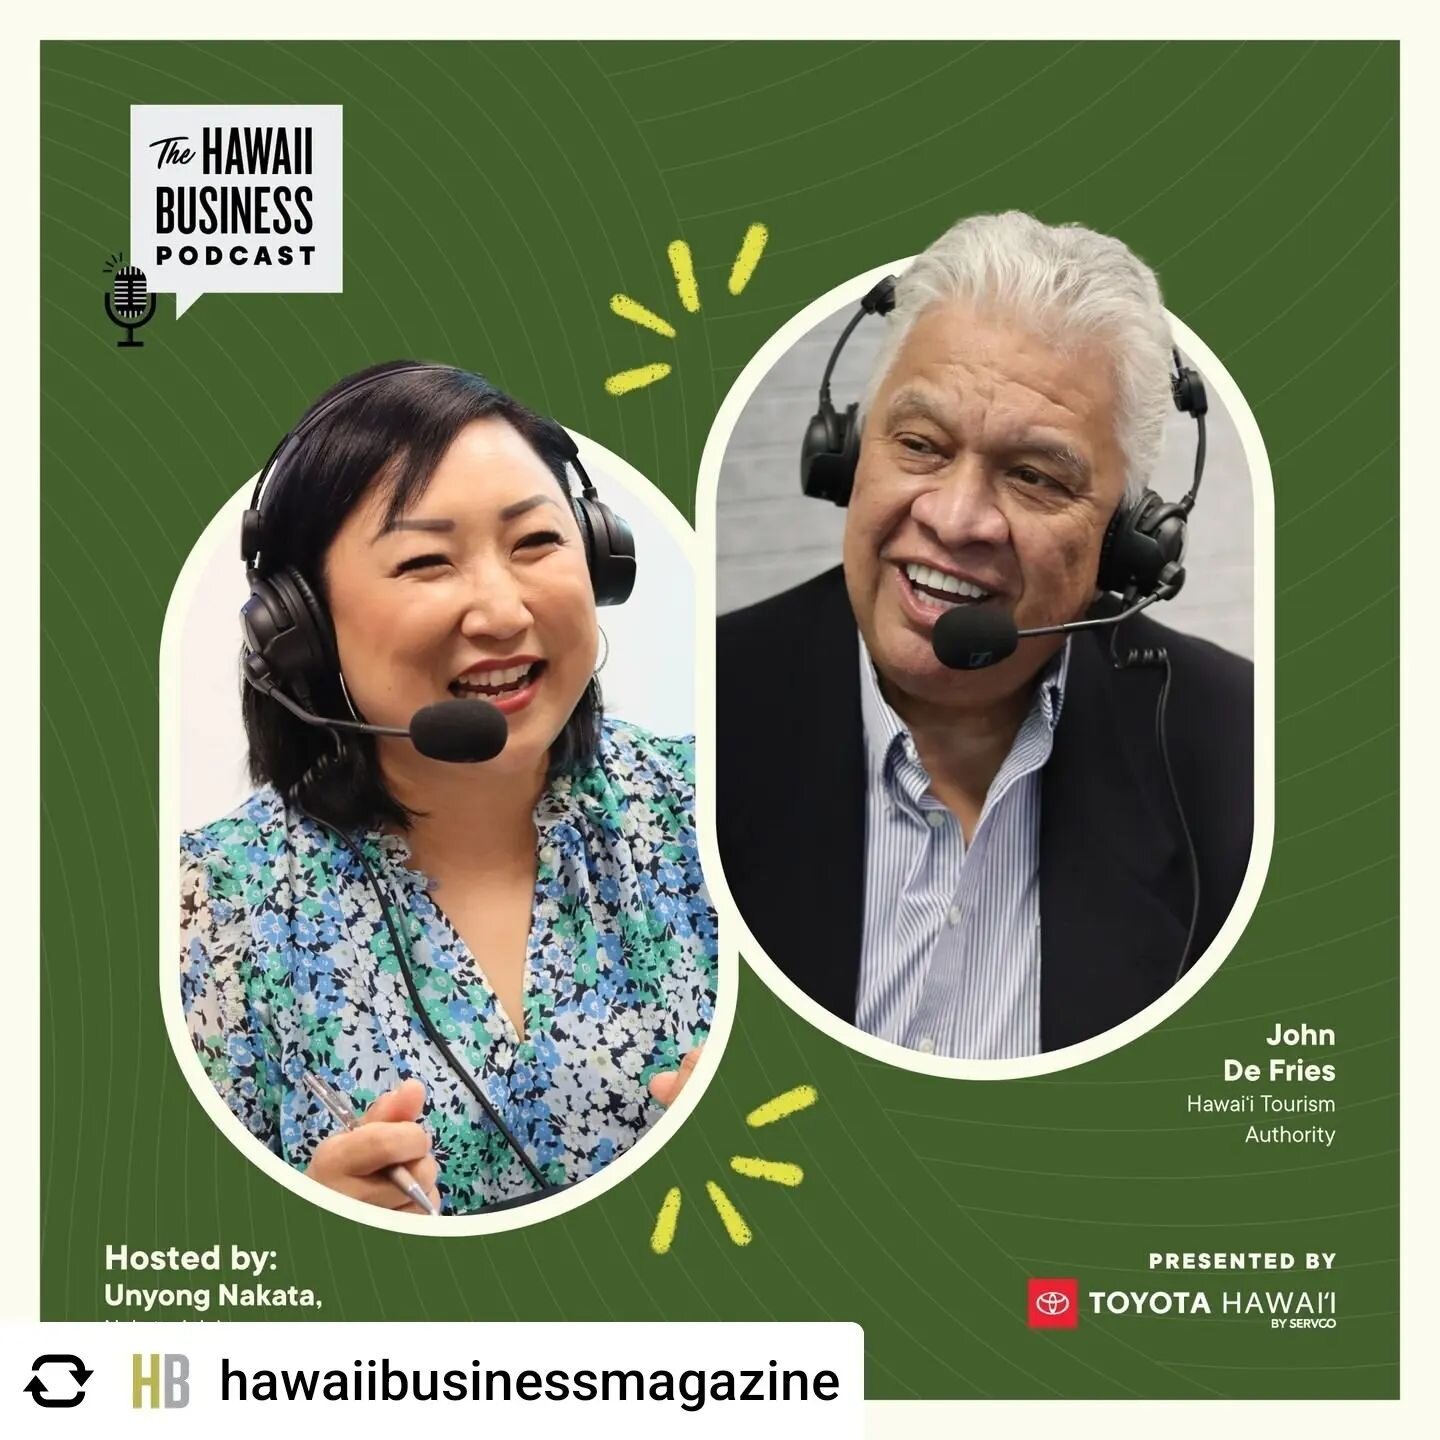 @jake_haupert had an incredible meeting with John Defries, President of Hawaii Tourism Authority, during his recent trip to Hawaii. It's not every day you get to meet someone who radiates greatness and passion for their work. Check out his reflection